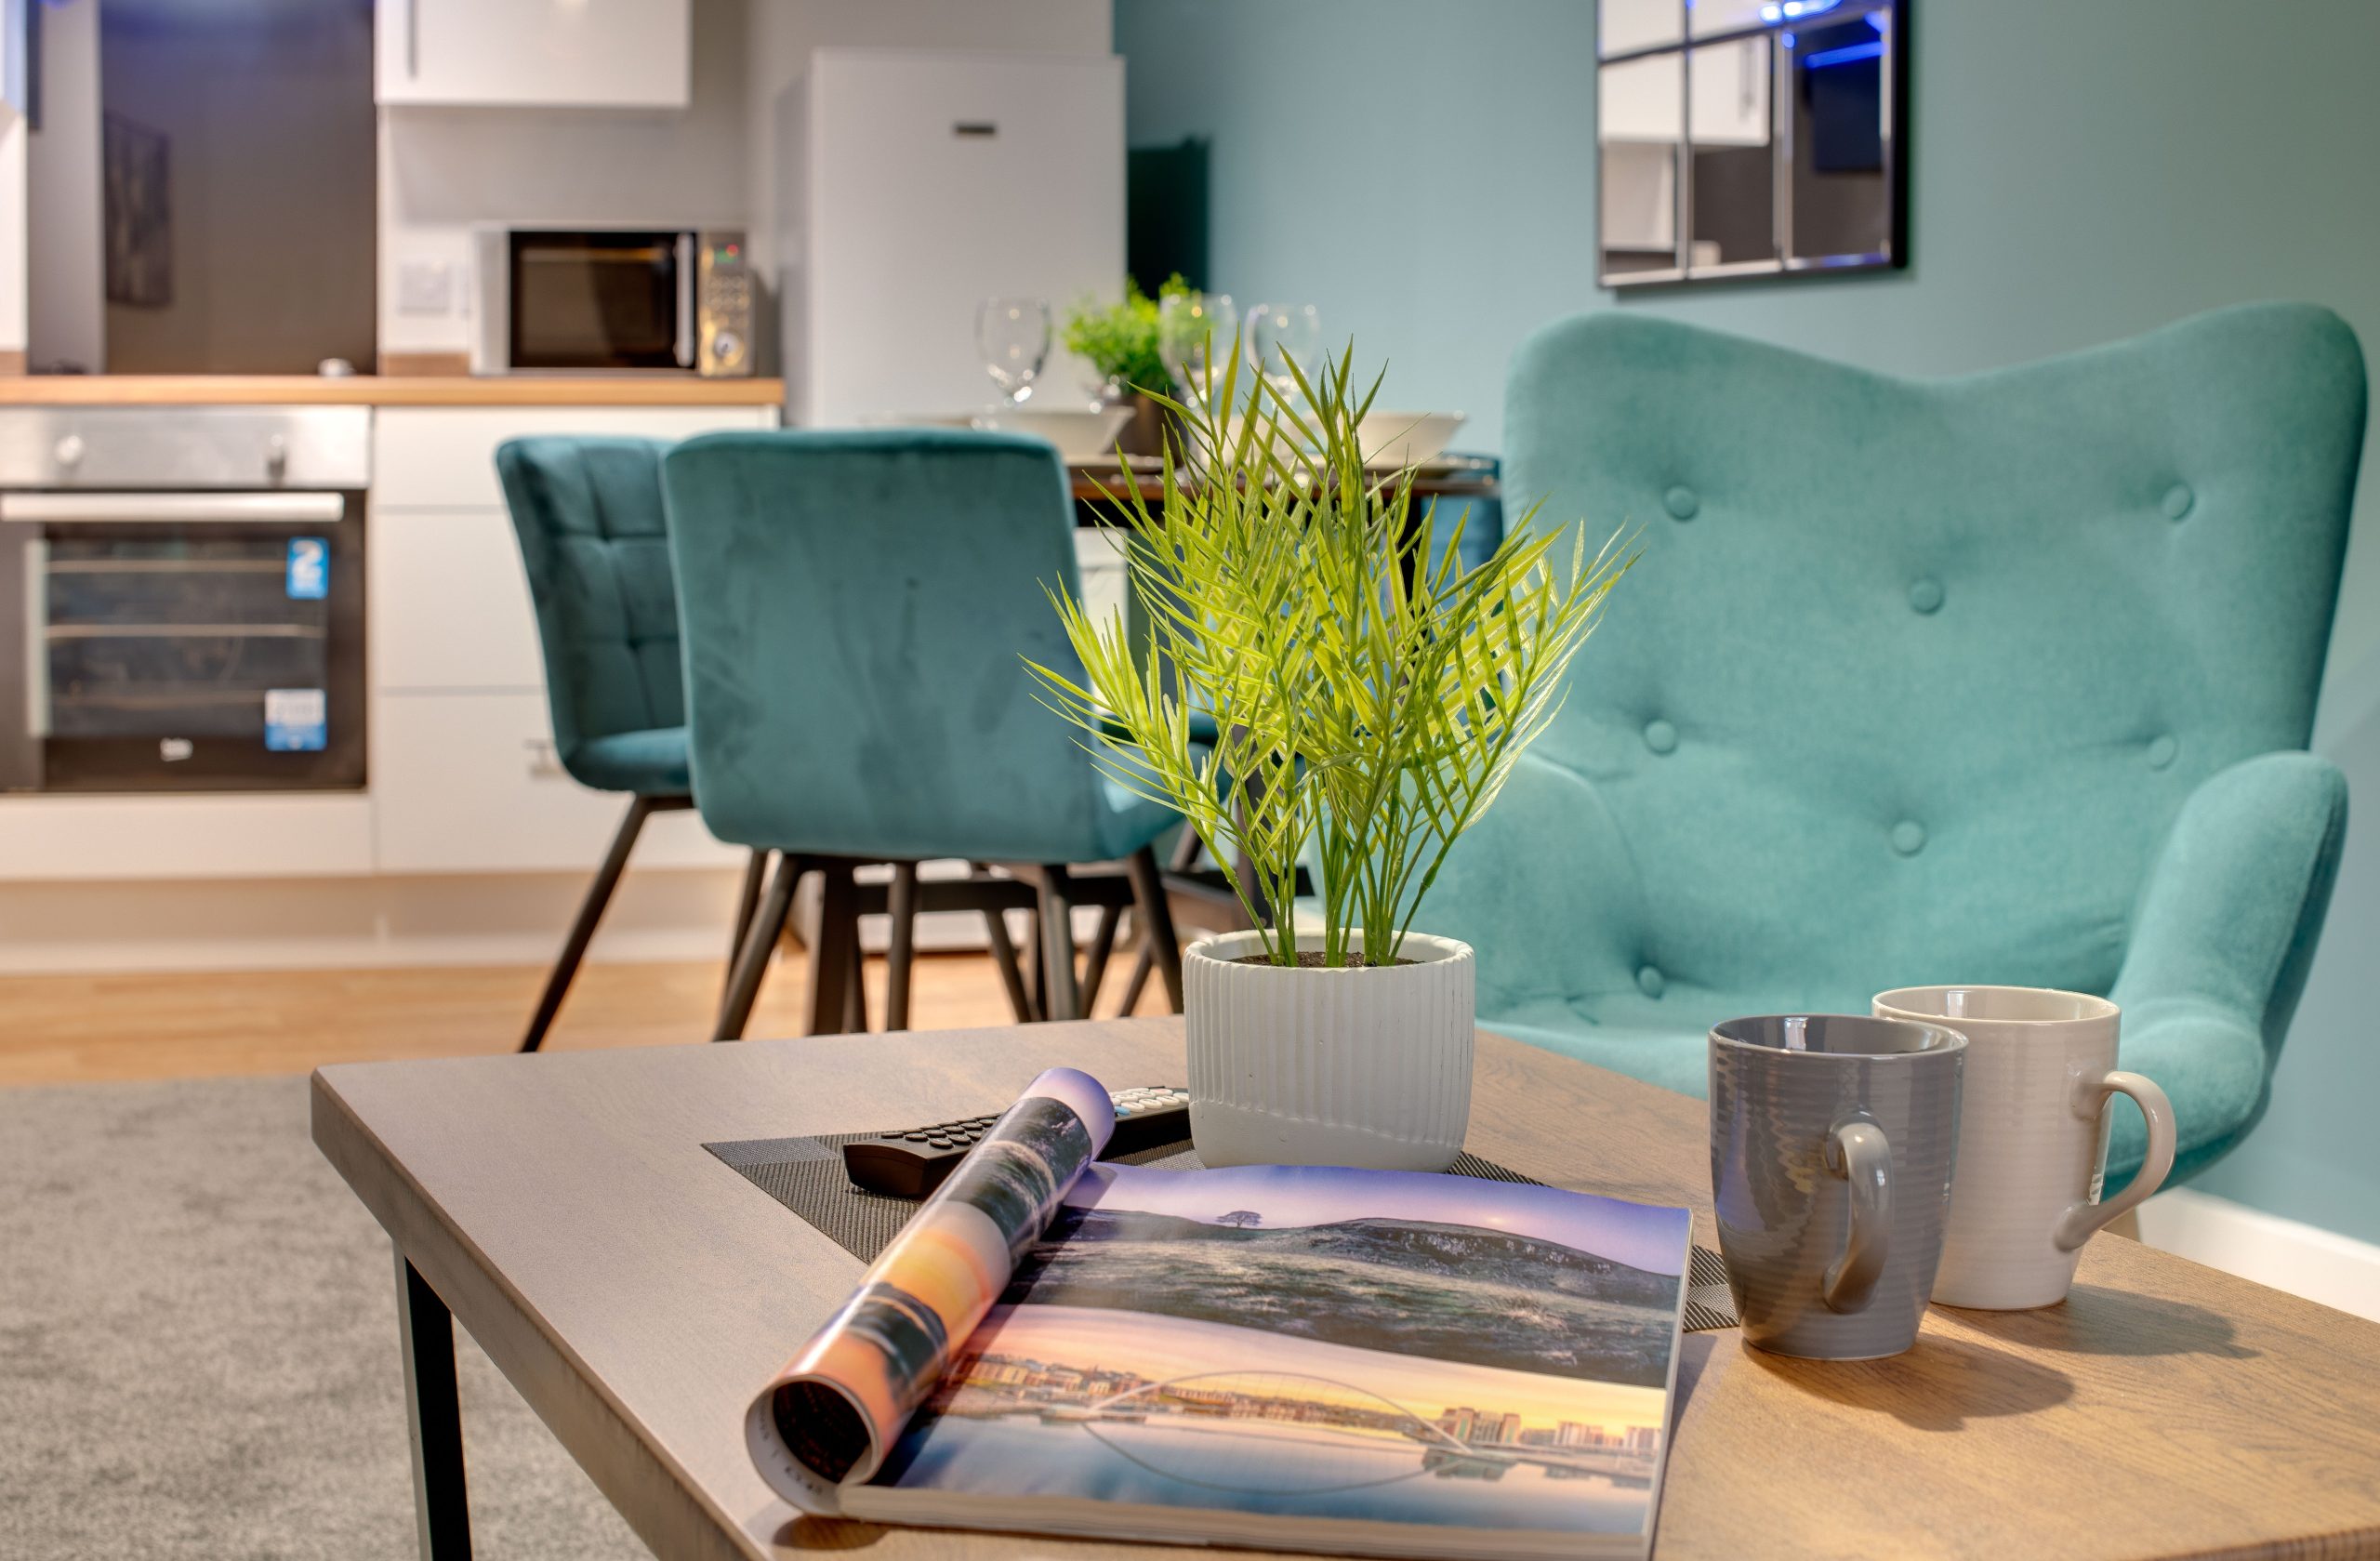 Interior of serviced apartment with blue arms chair and coffee table in the foreground and kitchen and dining area in the background.